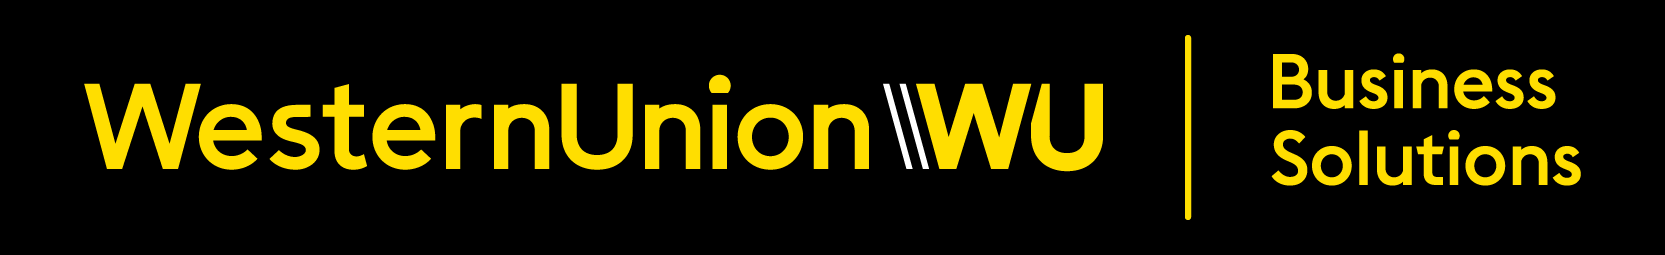 western union business solutions